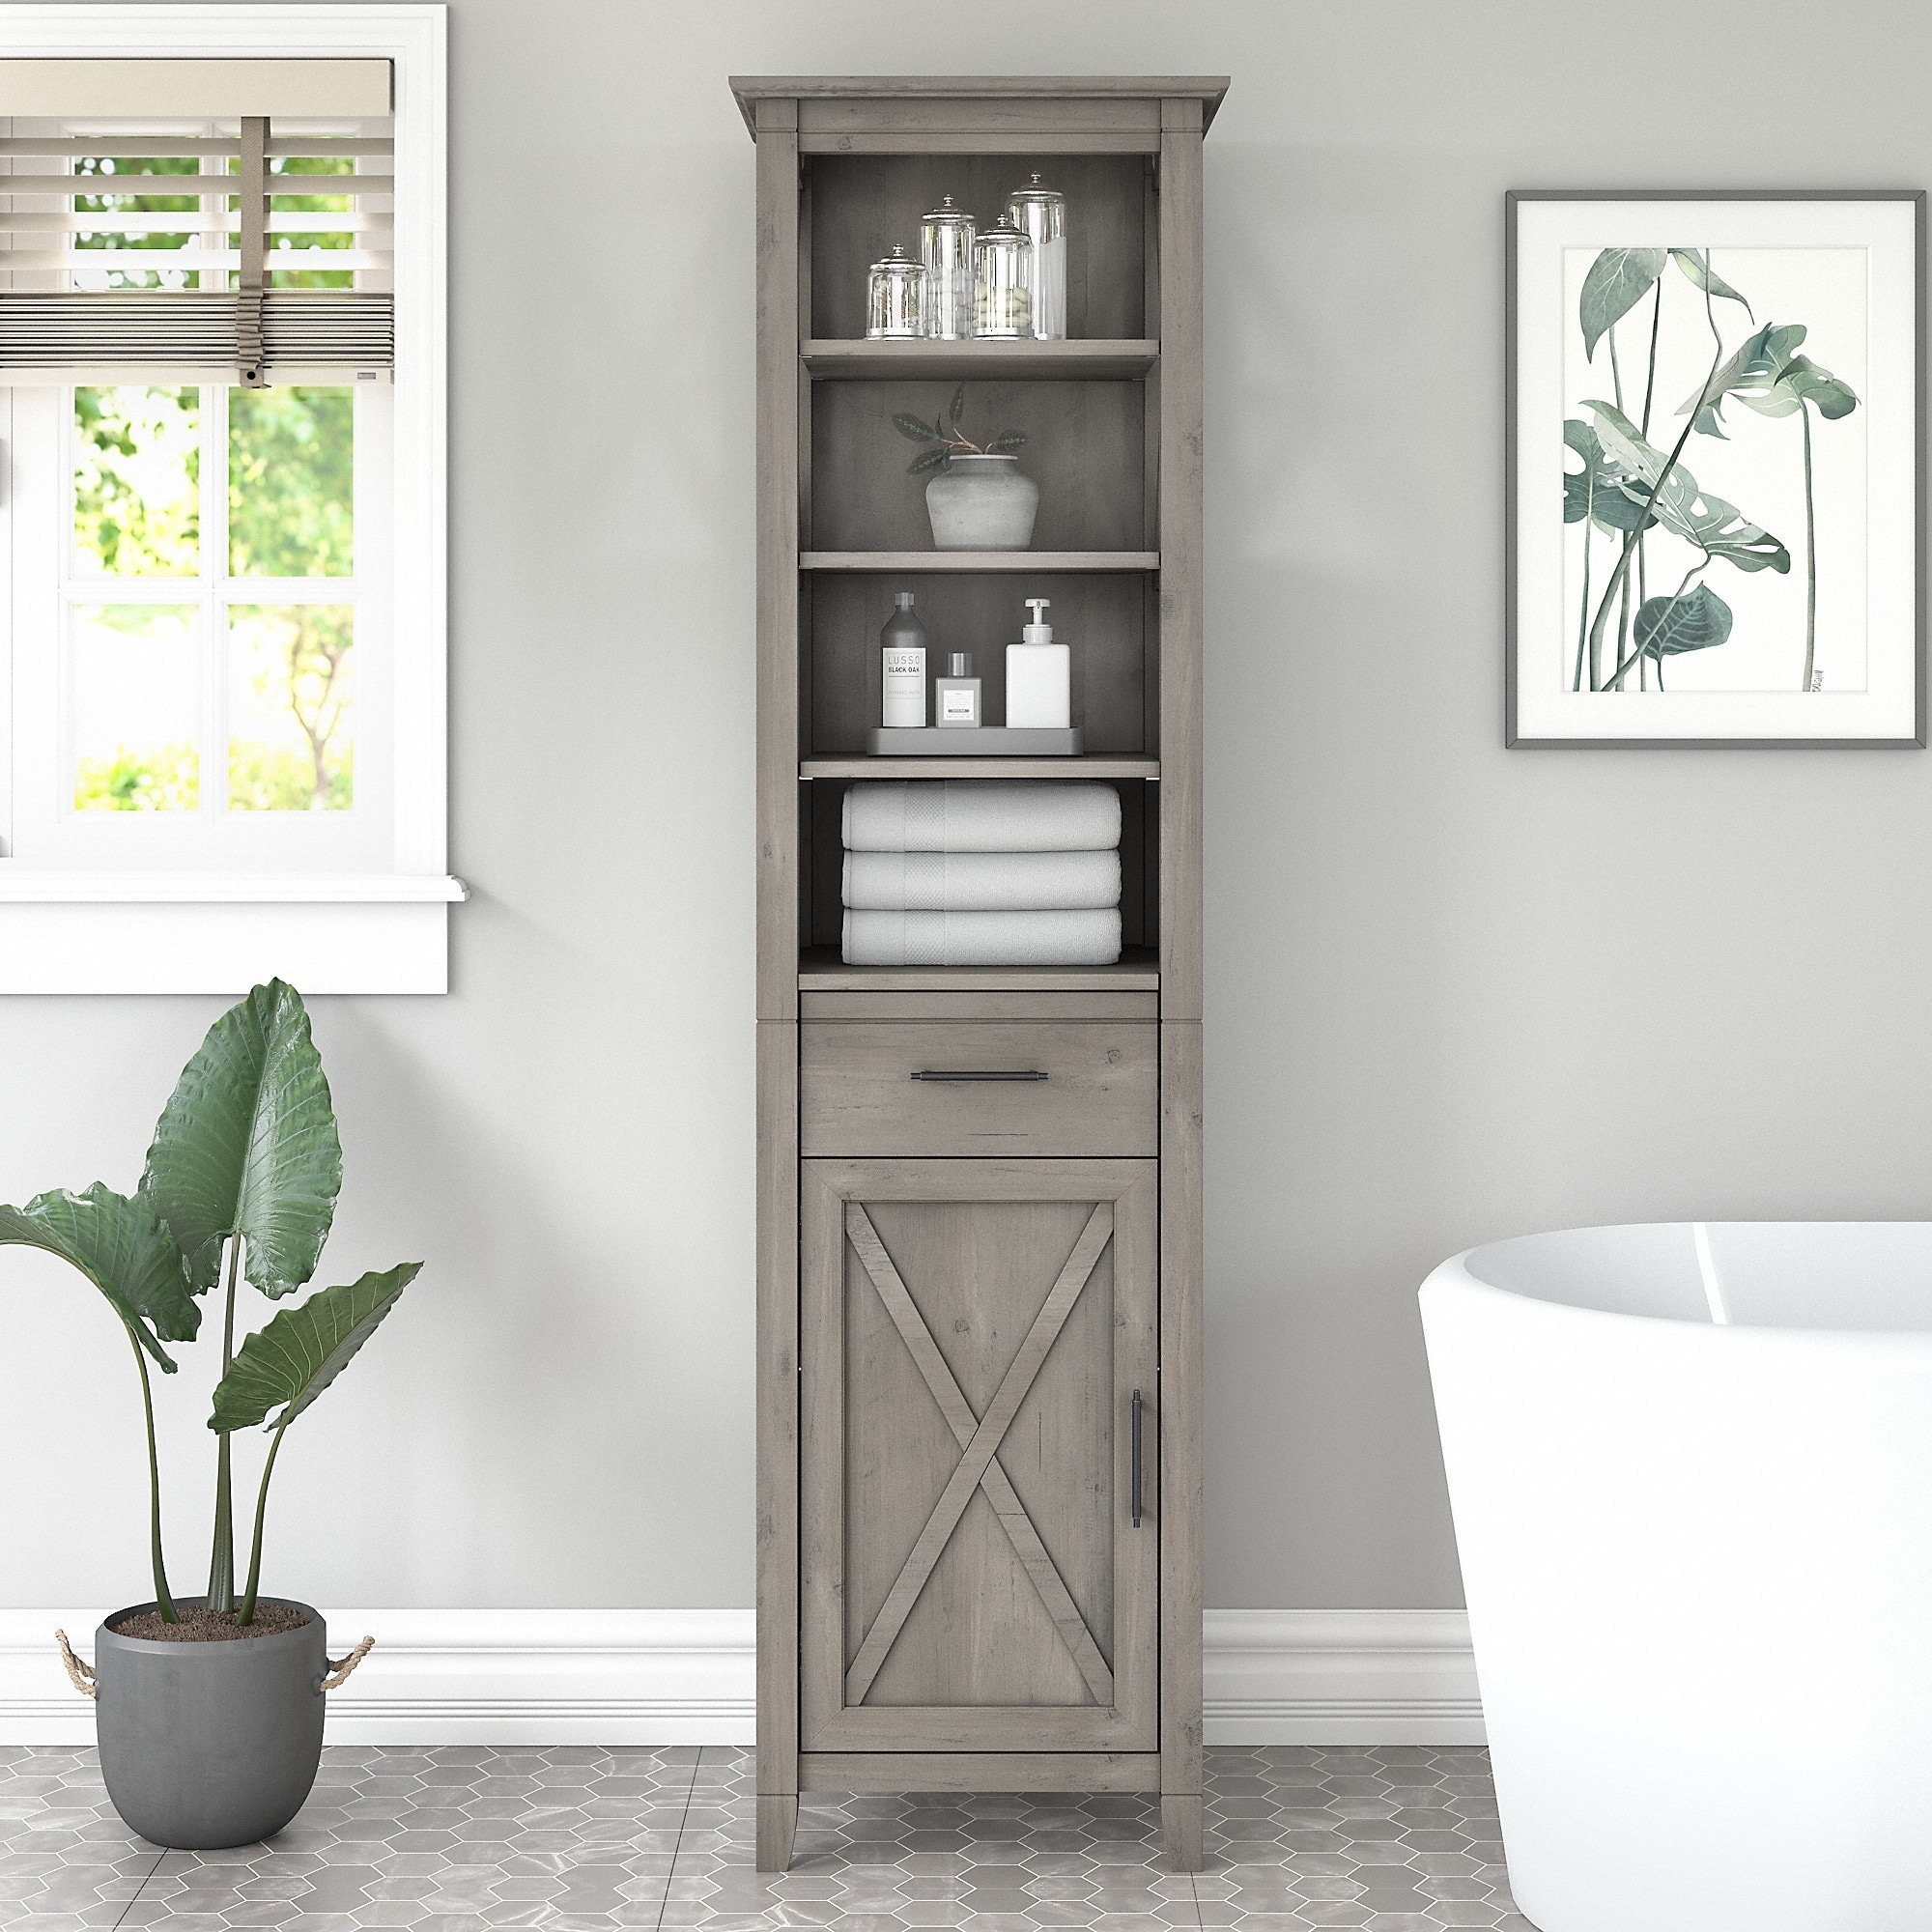 https://ak1.ostkcdn.com/images/products/is/images/direct/5e1d038d474563514b255468cea1ebe8d5610ffd/Key-West-Tall-Narrow-Bookcase-Cabinet-by-Bush-Furniture.jpg